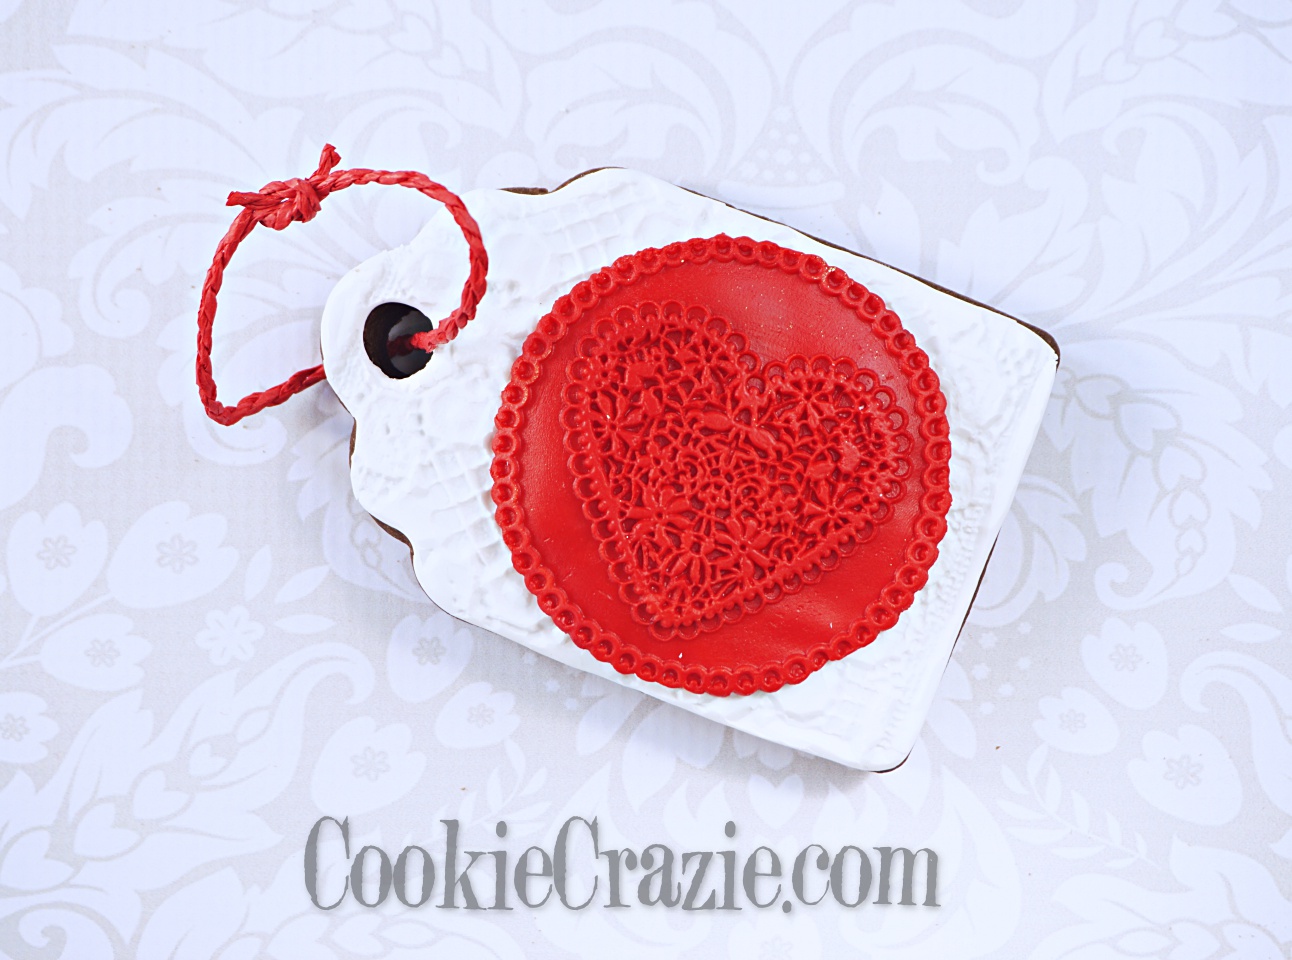  Valentines Heart Gift Tag Decorated Sugar Cookie YouTube video  HERE  